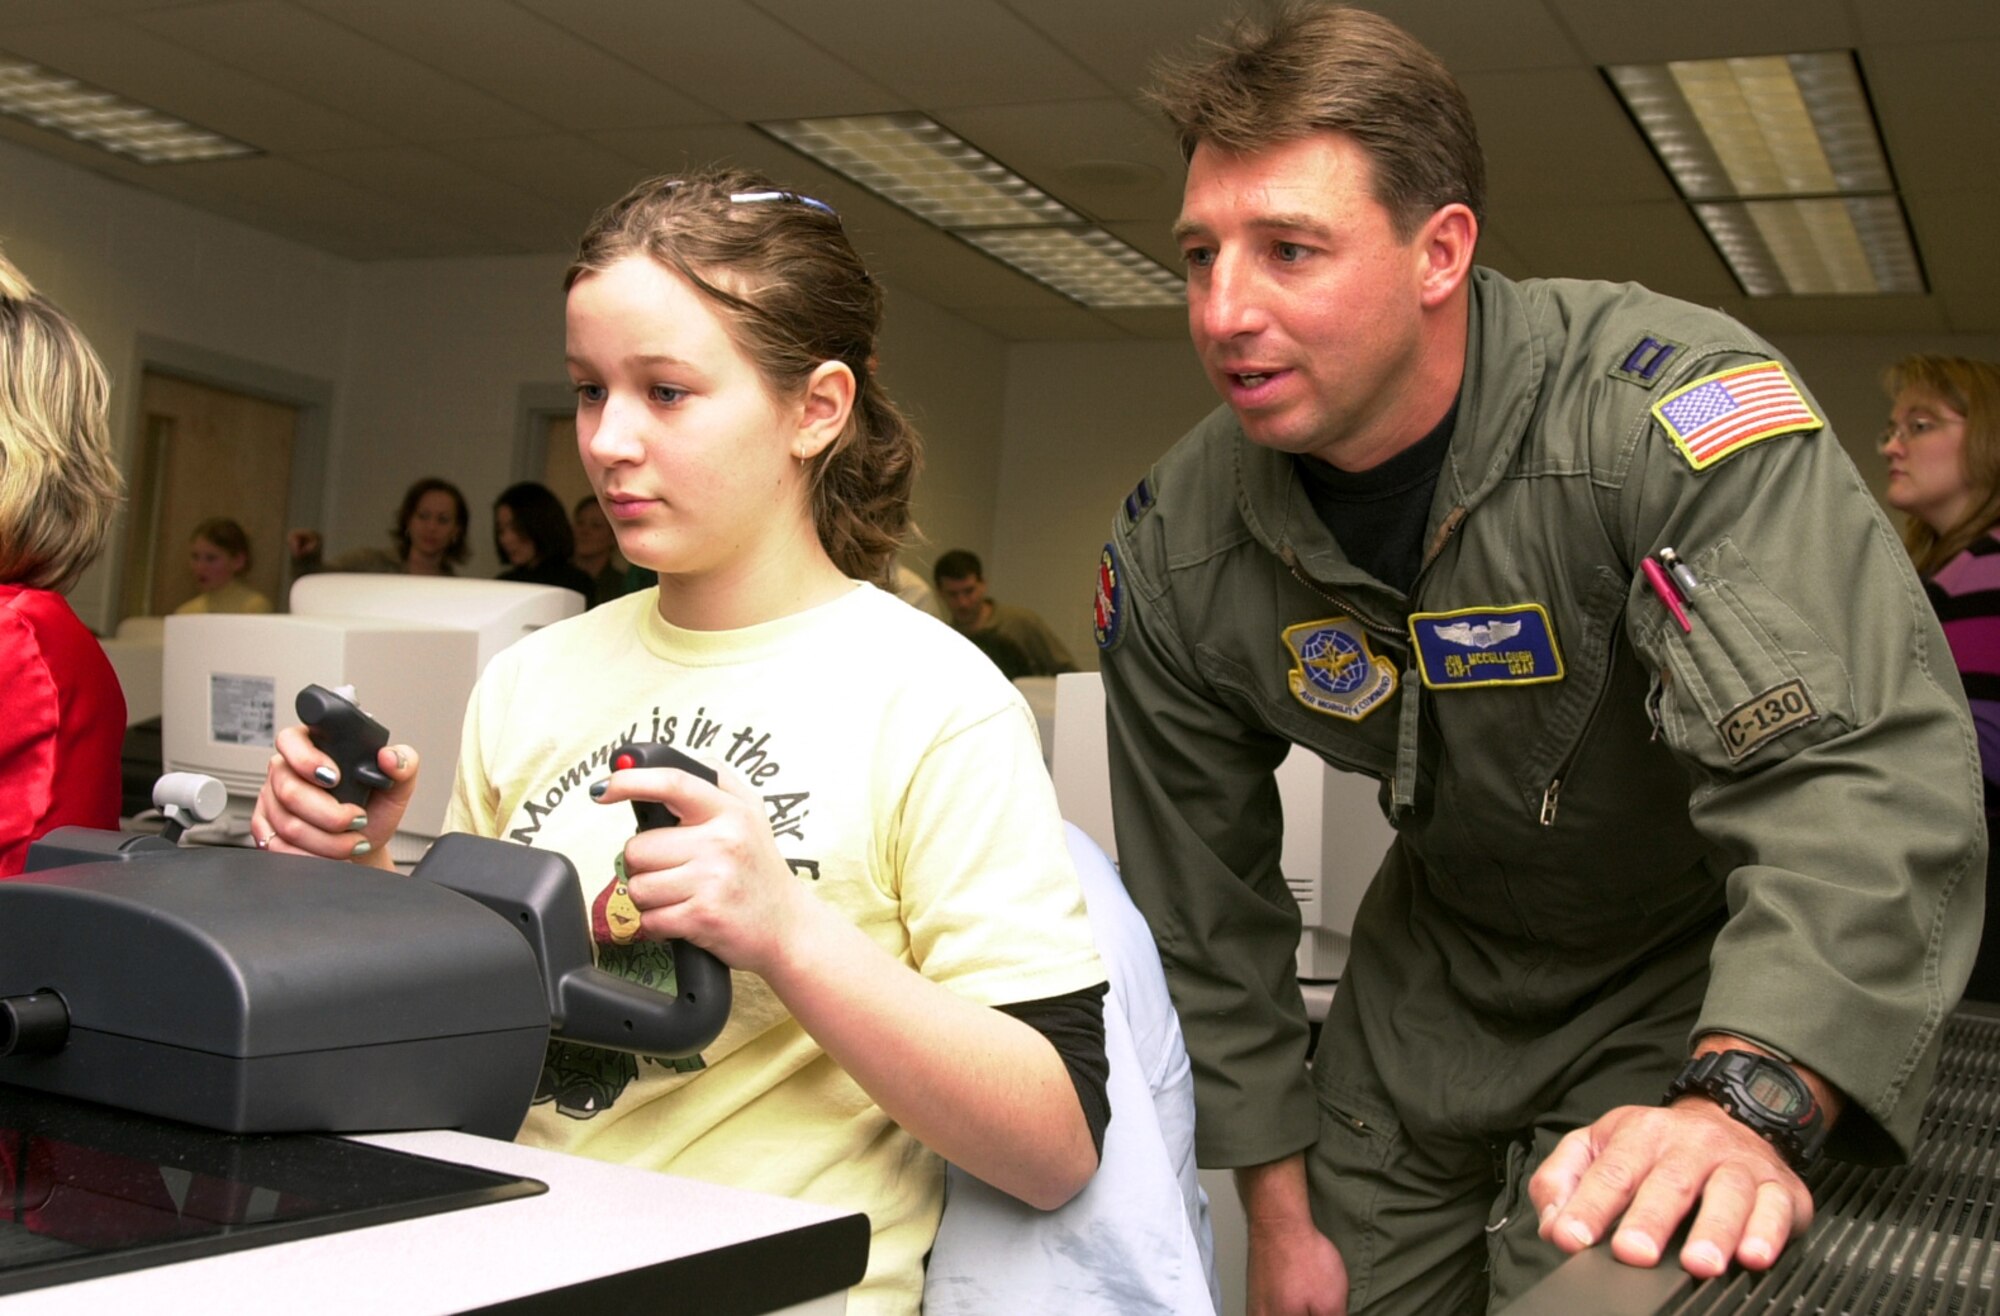 MARTINSBURG, W.Va. (AFPN) -- Fifth-grader Catherine Newcome, at the yoke, gets a feel for flying a small plane on a computer simulator during a National Guard Starbase exercise in Martinsburg, W.Va. Capt. Jon McCullough, a C-130 Hercules pilot in the West Virginia Air National Guard, offers some helpful hints while watching her progress. (U.S. Air Force photo by Master Sgt. Bob Haskell)